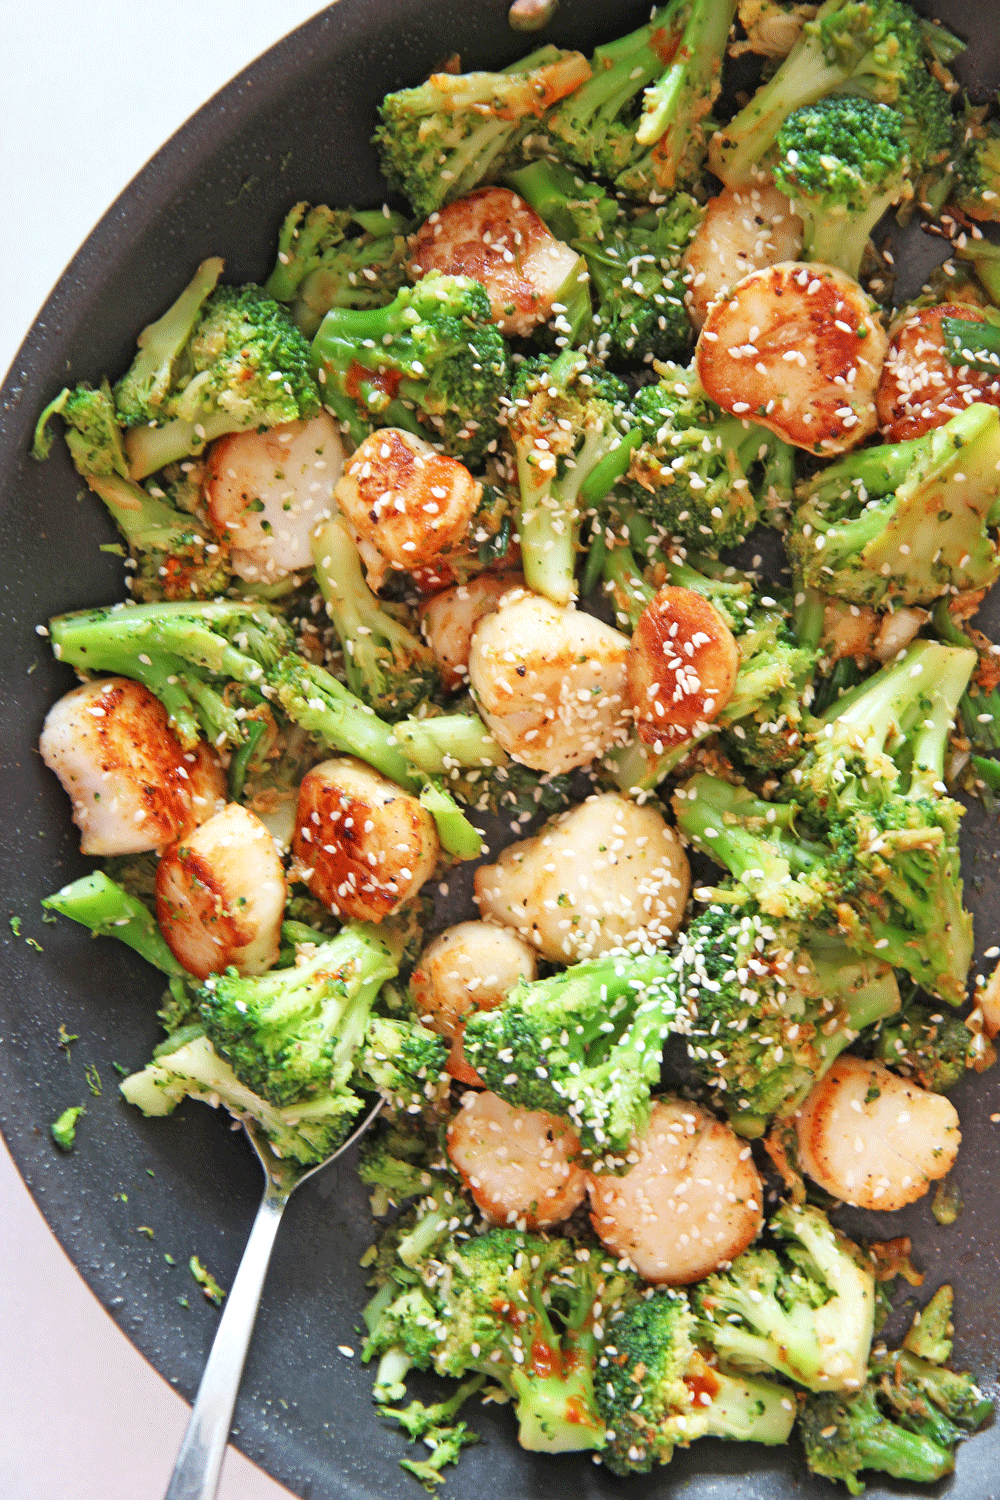 Scallop and Broccoli Stir Fry (15 minute recipe). Grab garlic, ginger, scallops, soy sauce and sriracha. This is an easy one pot take out dinner at home. Happy Cooking! www.ChopHappy.com #strifry #scallops